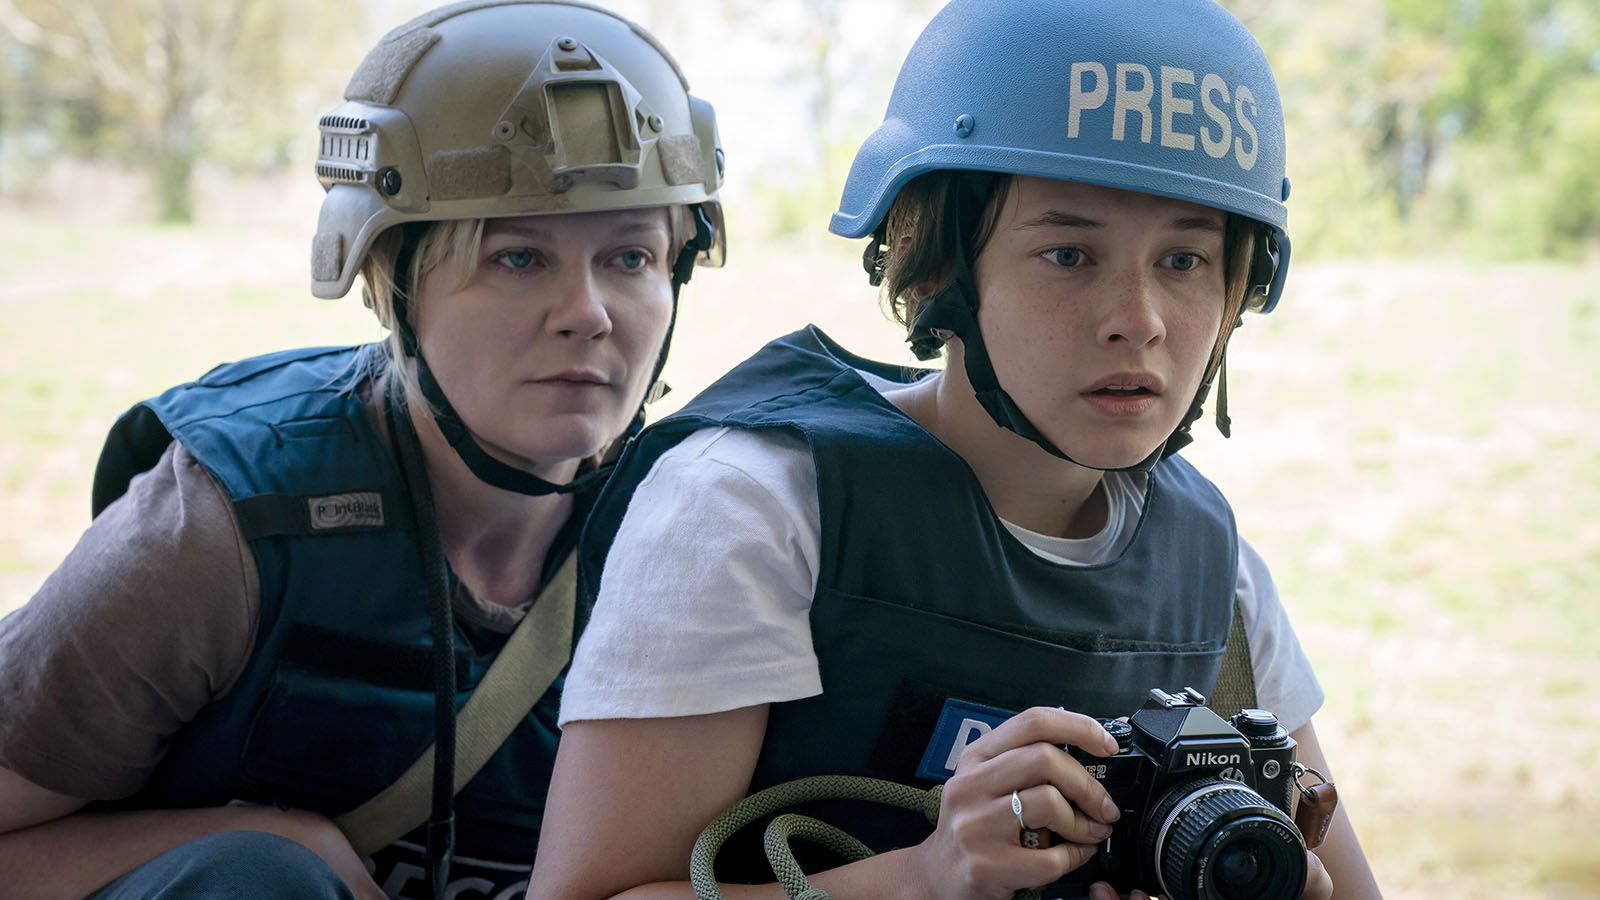 Kirsten Dunst, left, and Cailie Spaeny star in the new A24 film Civil War.